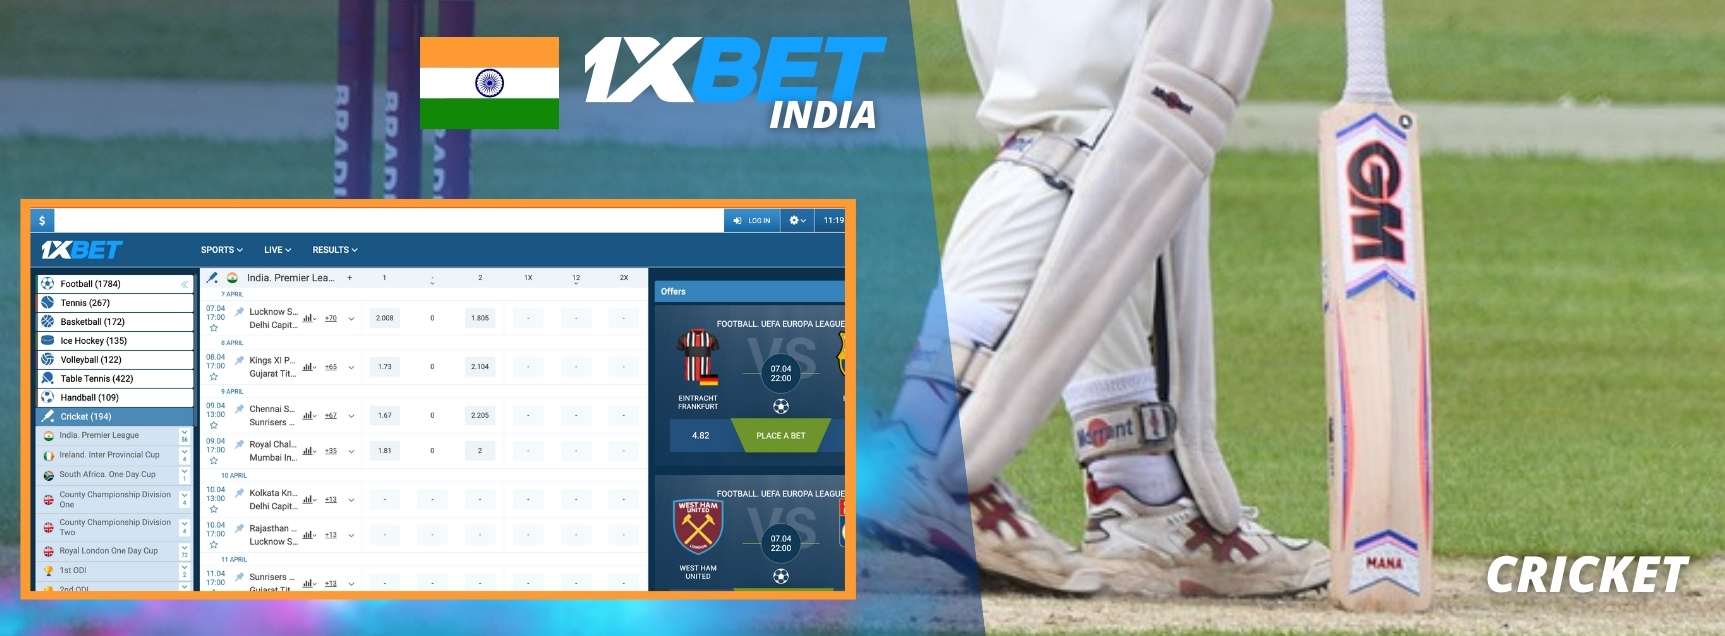 Cricket betting with 1xBet